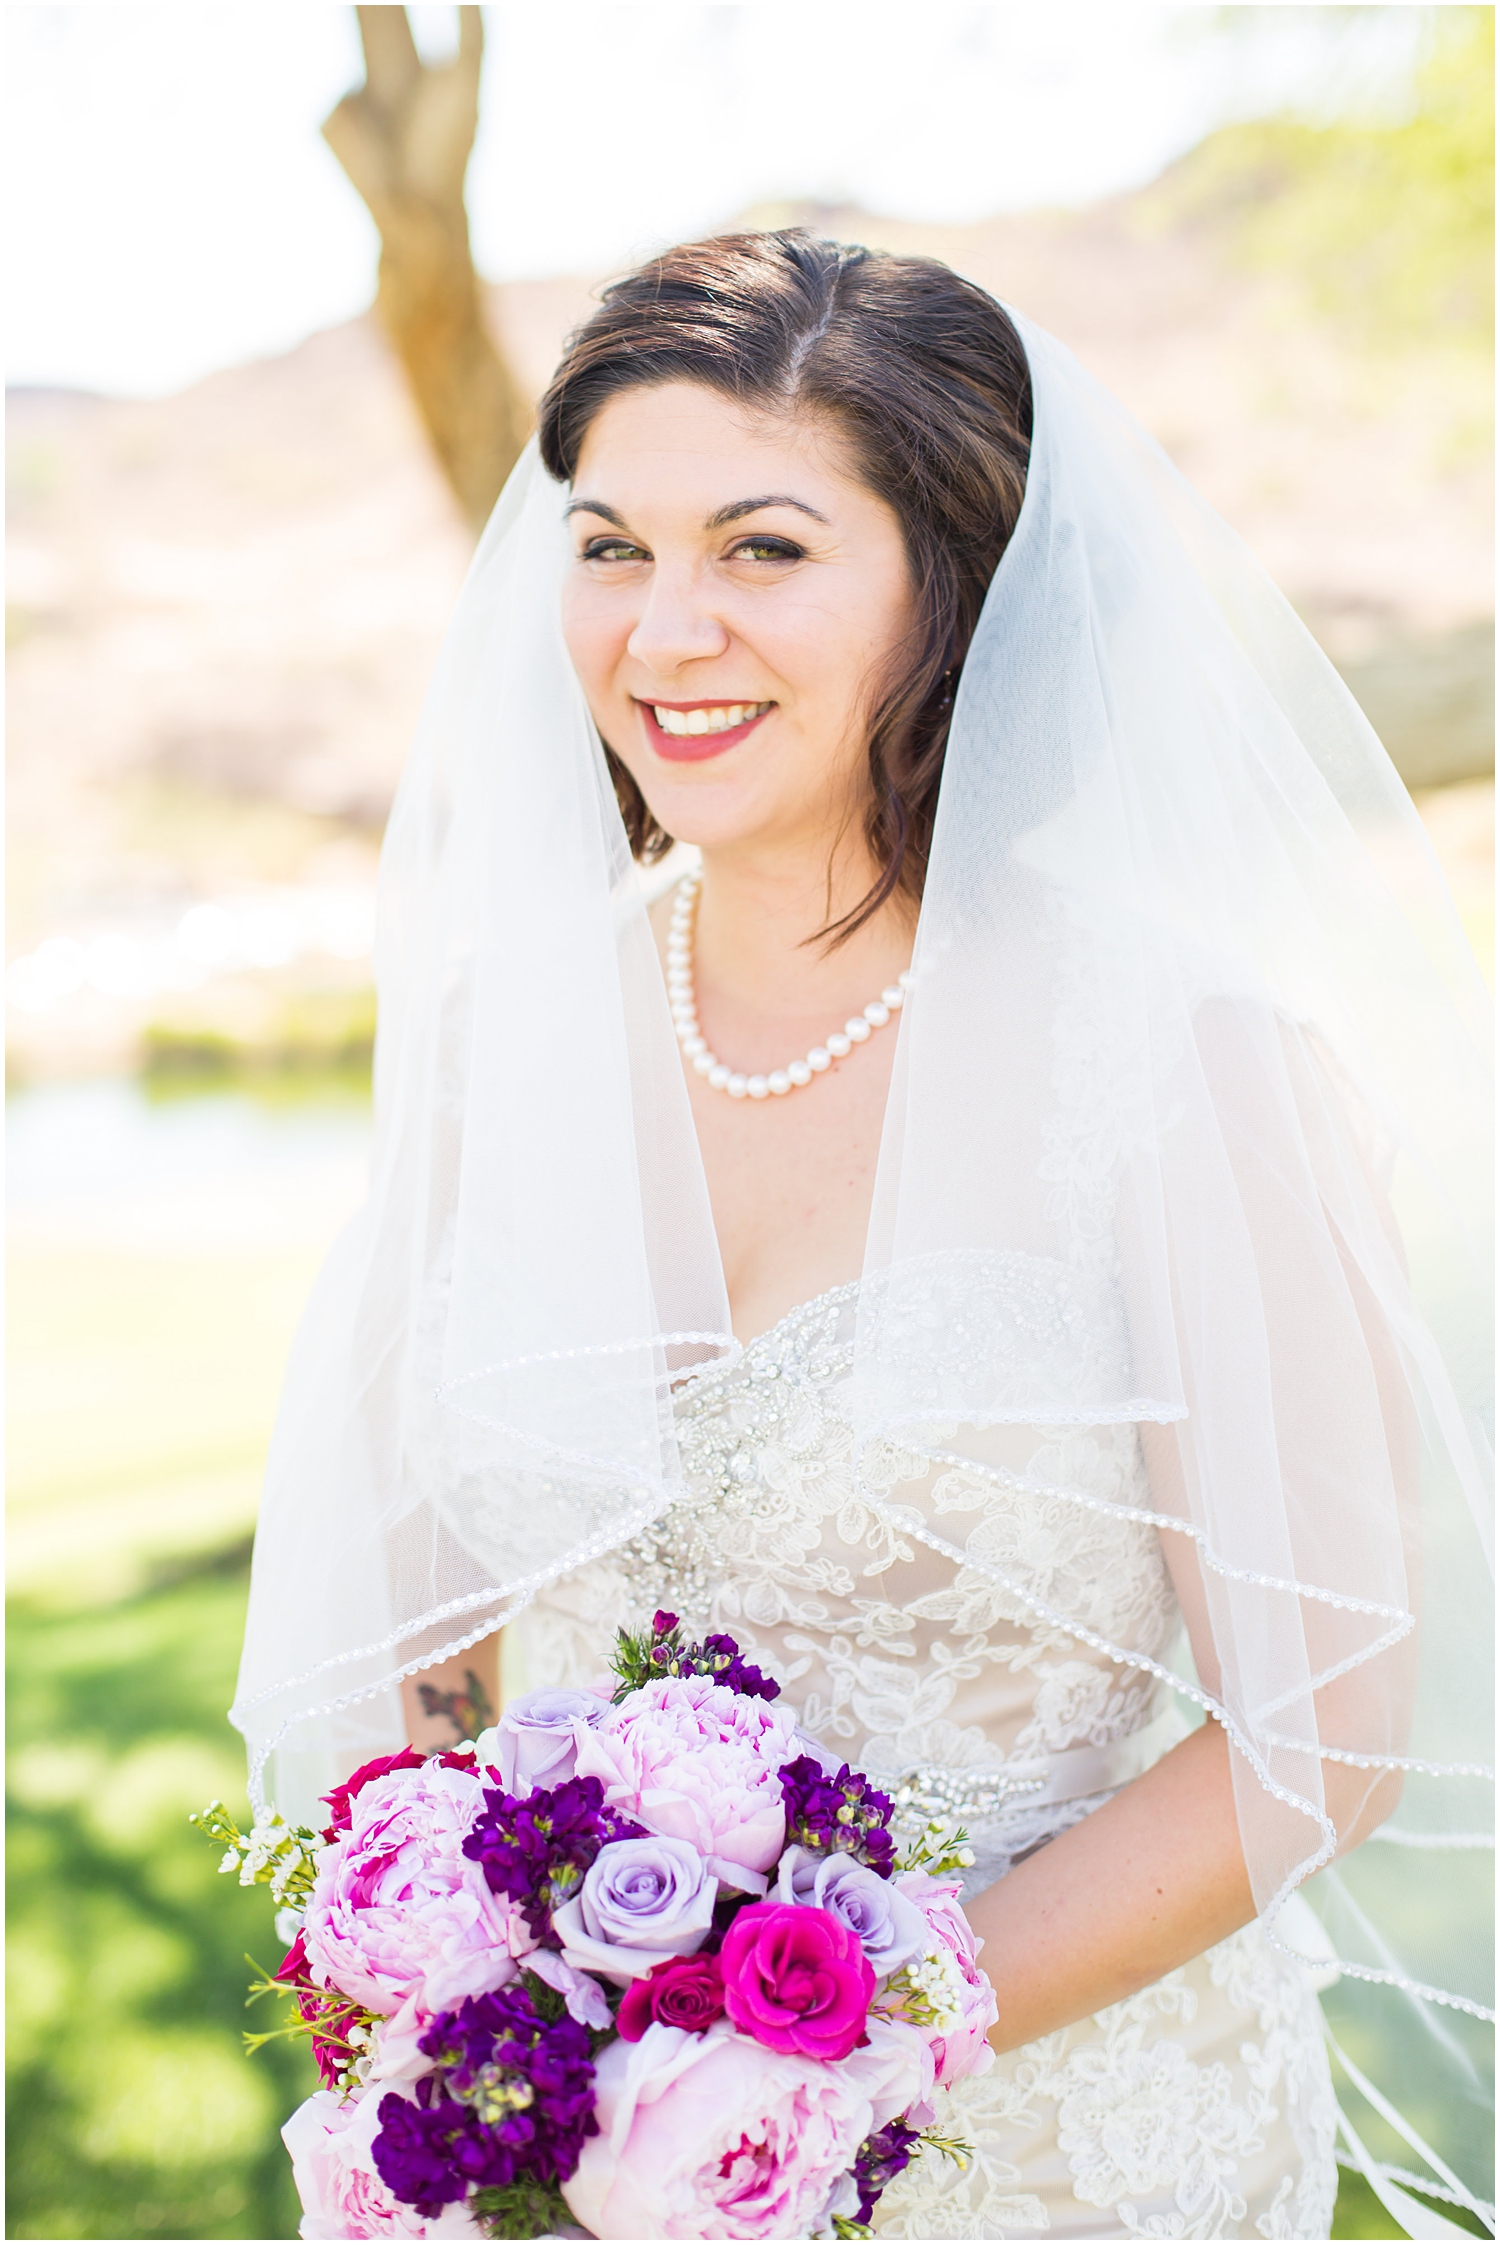 bride in strapless dress with veil and purple lavender peony and rose bouquet wedding day portrait